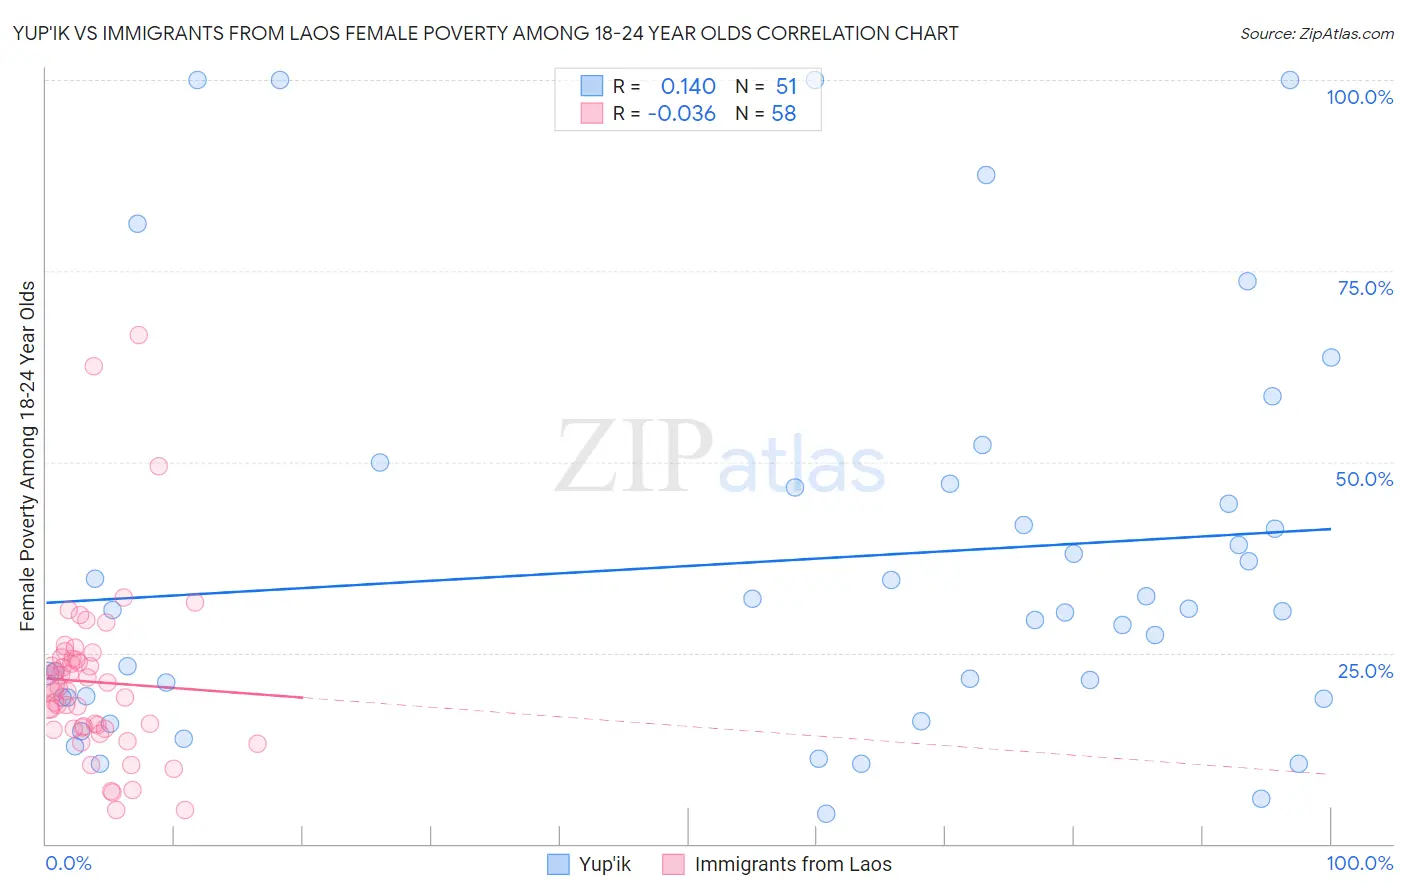 Yup'ik vs Immigrants from Laos Female Poverty Among 18-24 Year Olds